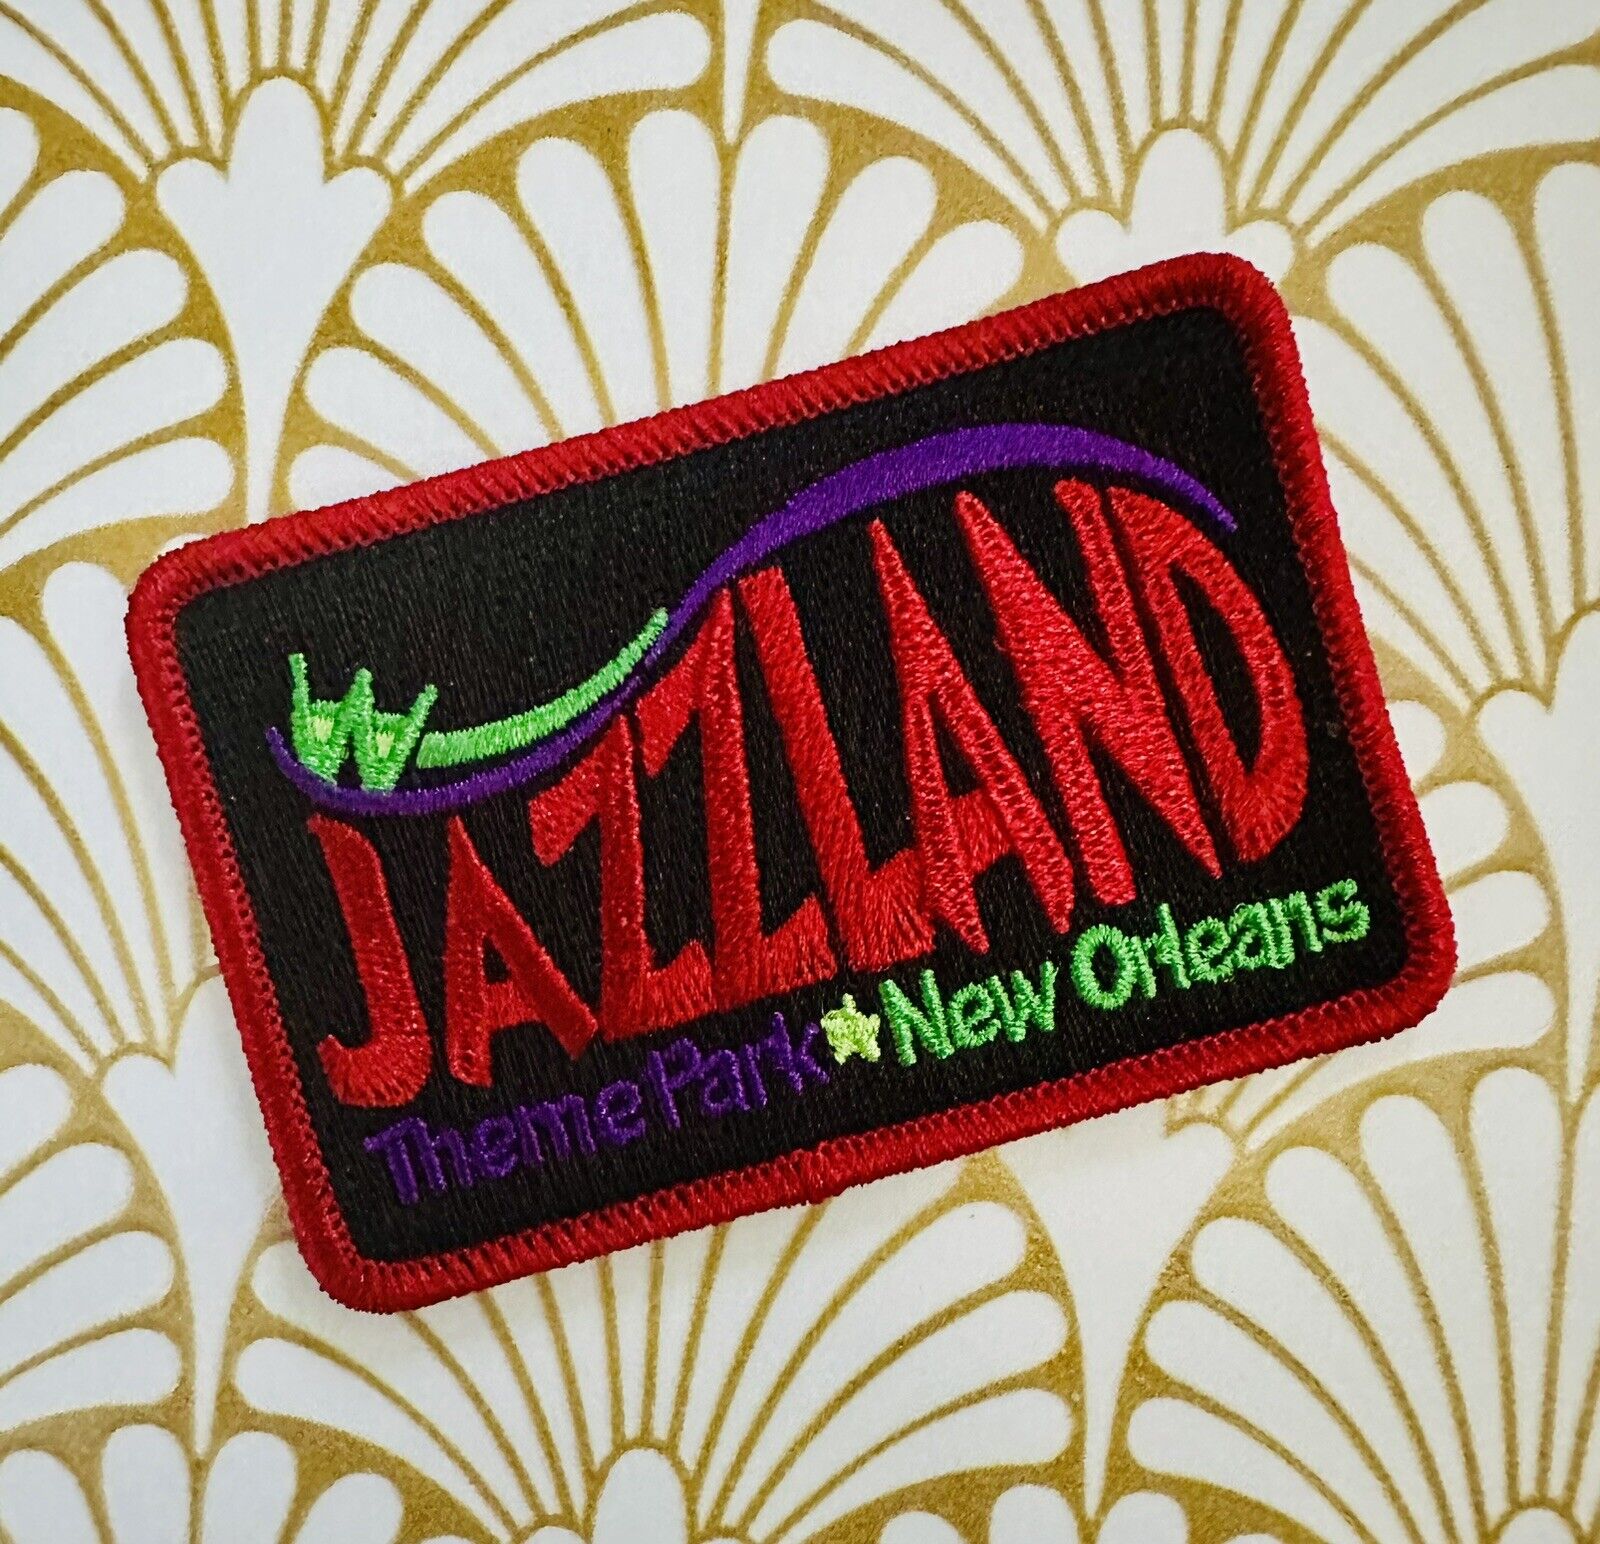 New Orleans Jazzland Embroidered Iron On Patch Vintage Nostalgia Theme Park New